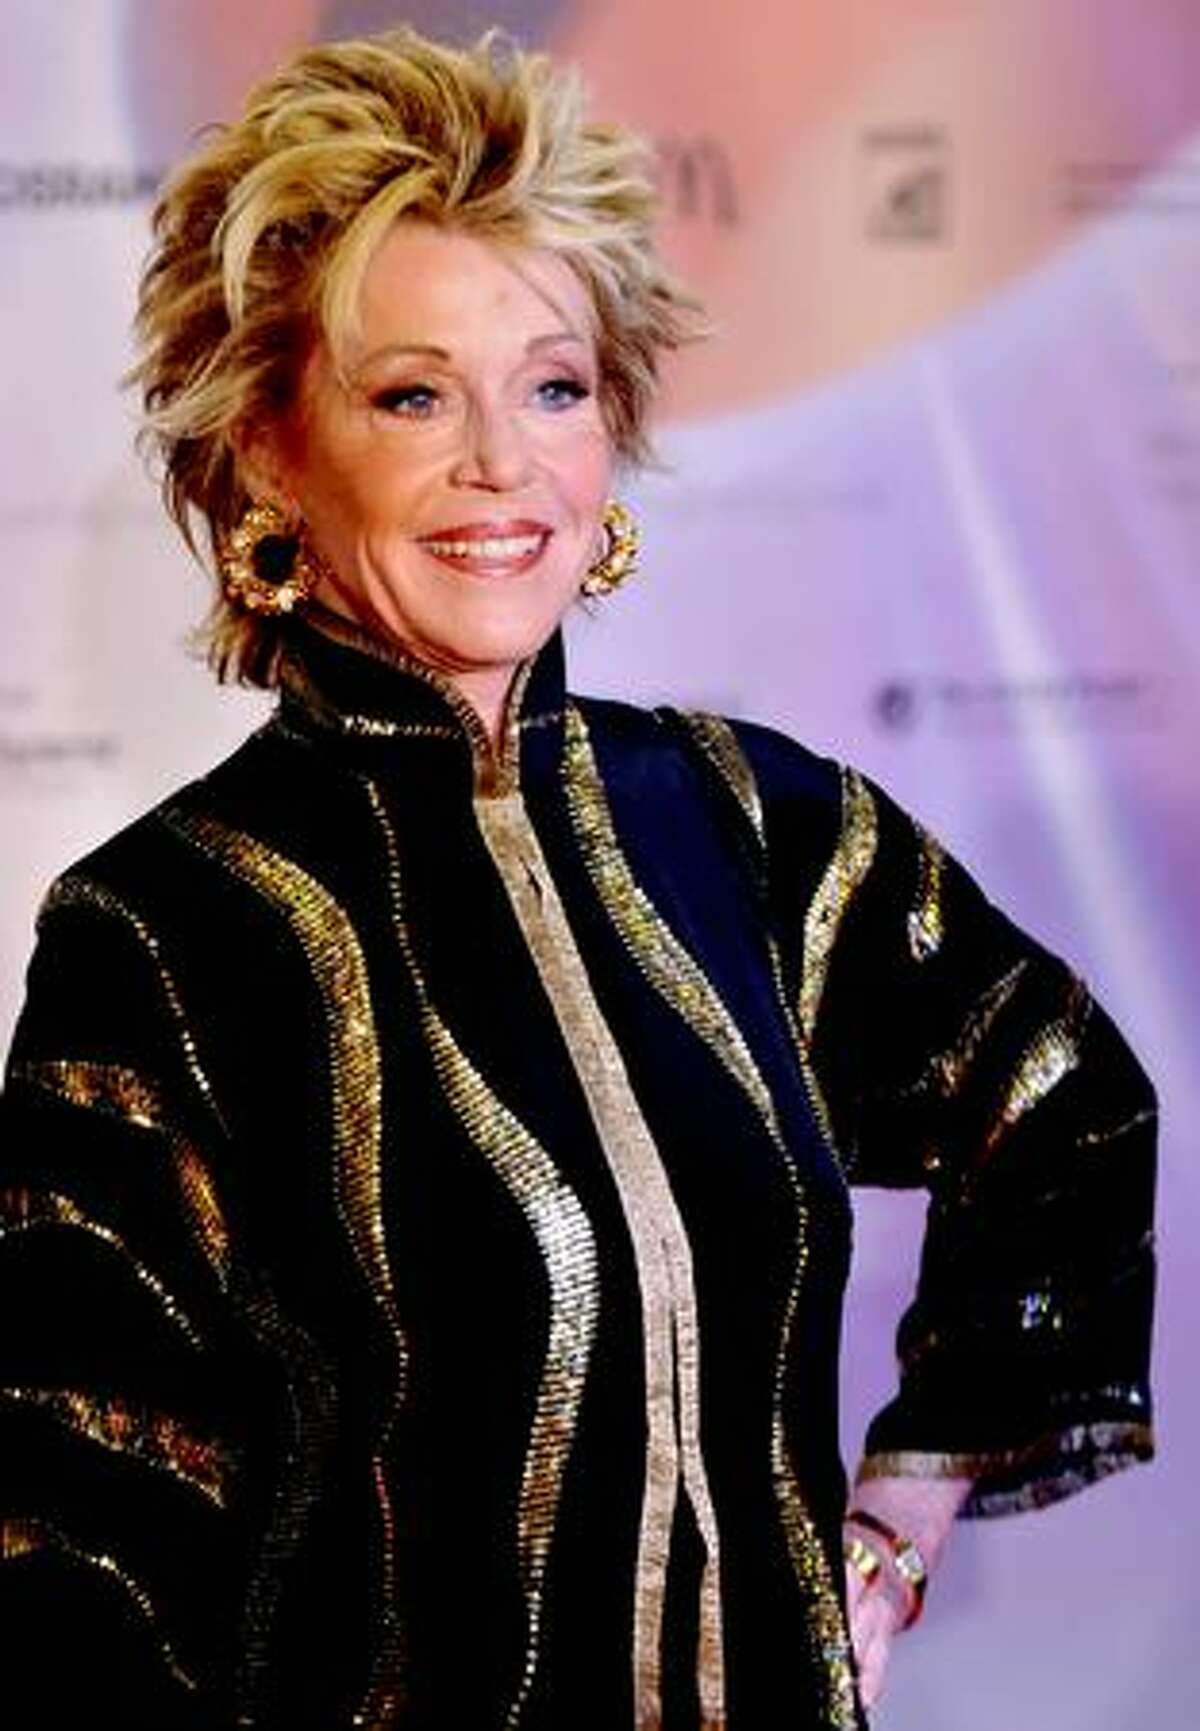 Actress Jane Fonda poses ahead of the German Sustainability Awards in Duesseldorf, western Germany.